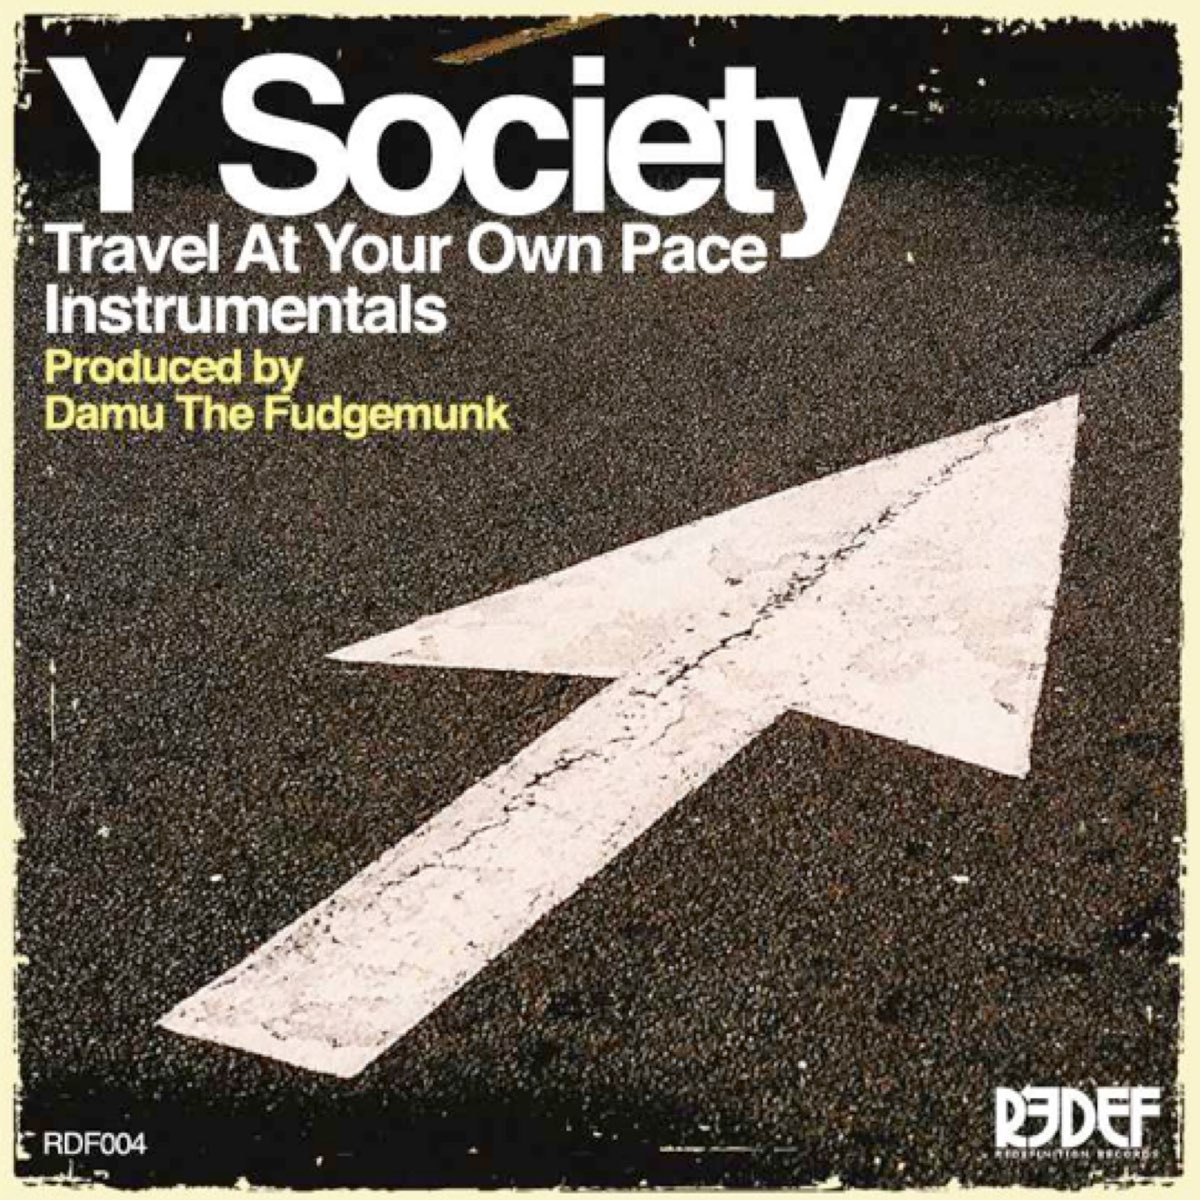 Y society. Travel at your own Pace y Society. Go at your own Pace. Damu the Fudgemunk. Go at your own Pace Crop.